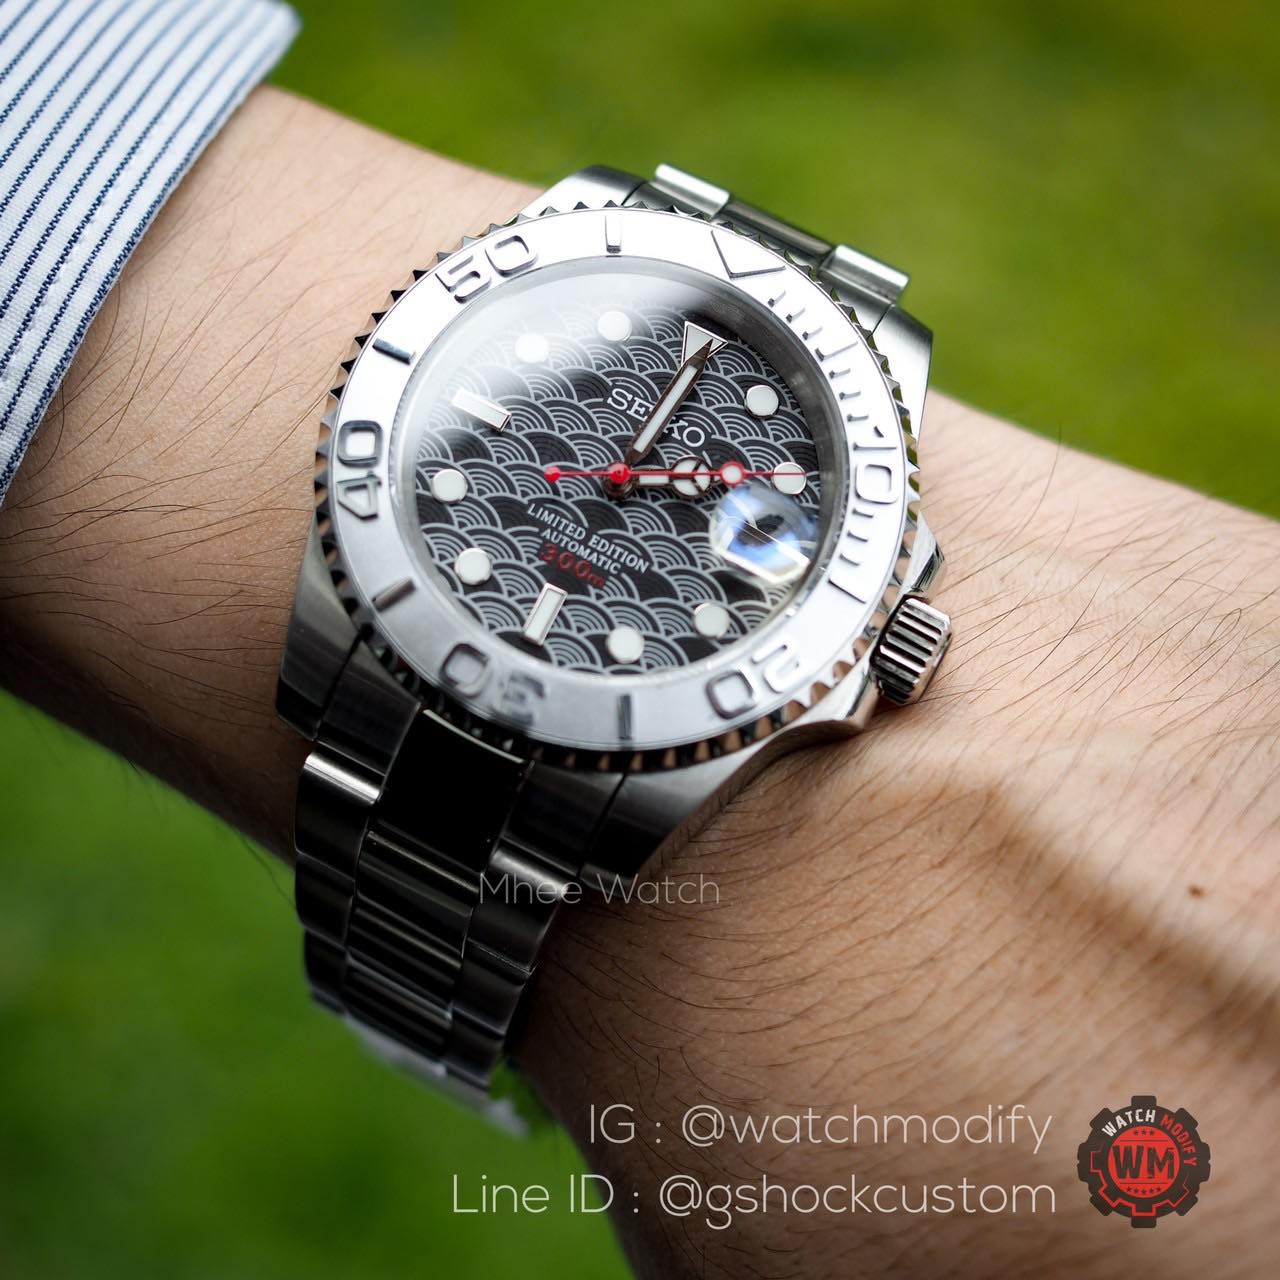 SEIKO Modified Rhodium Yacht Master Japannese Wave Dial - mheewatchshop :  Inspired by 